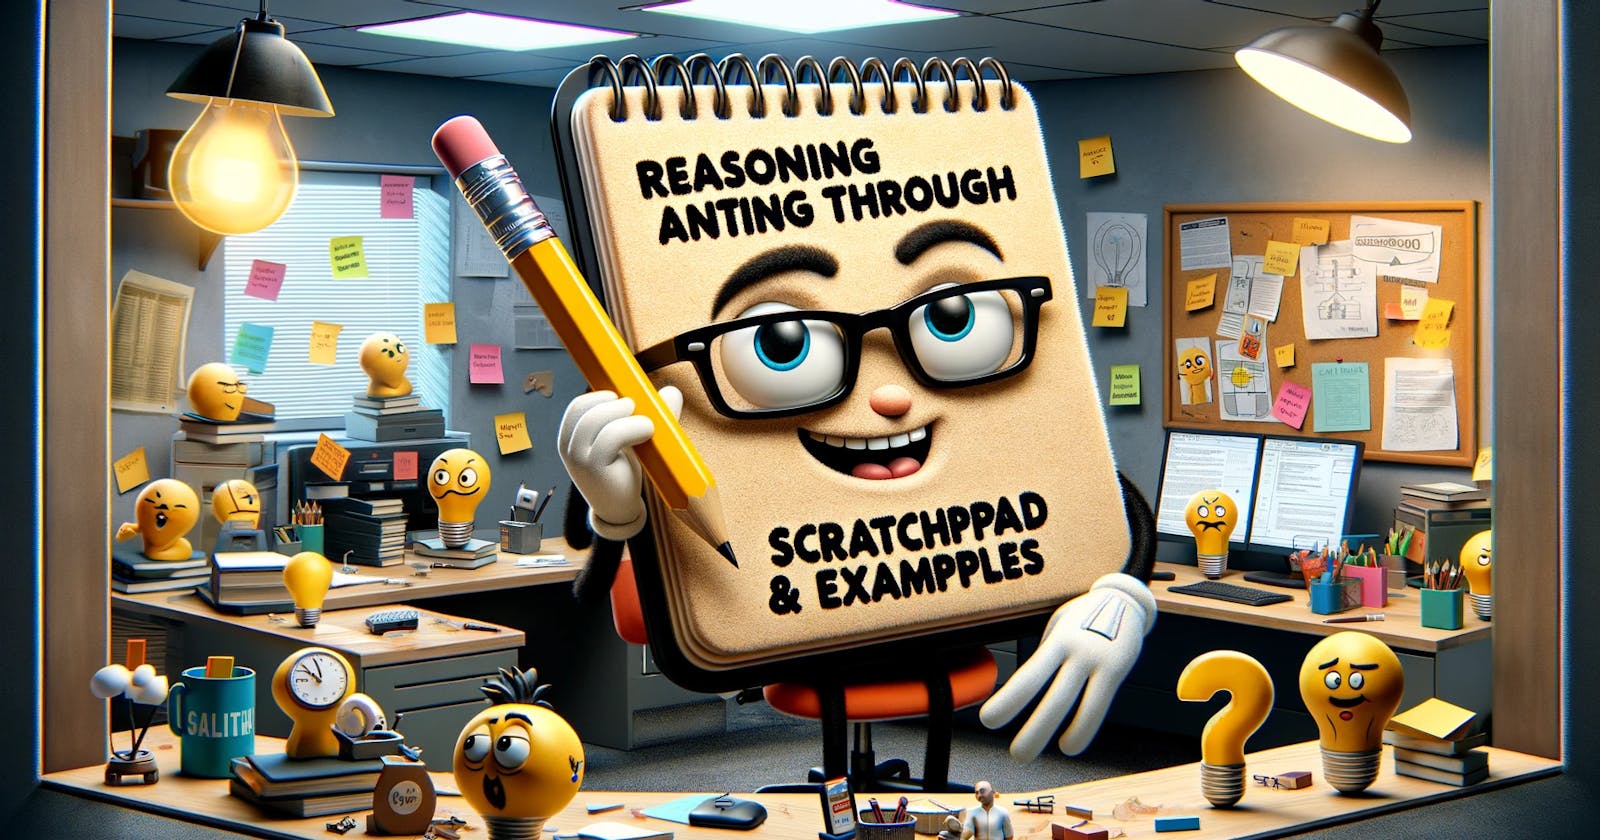 Reasoning and Acting through Scratchpad and Examples